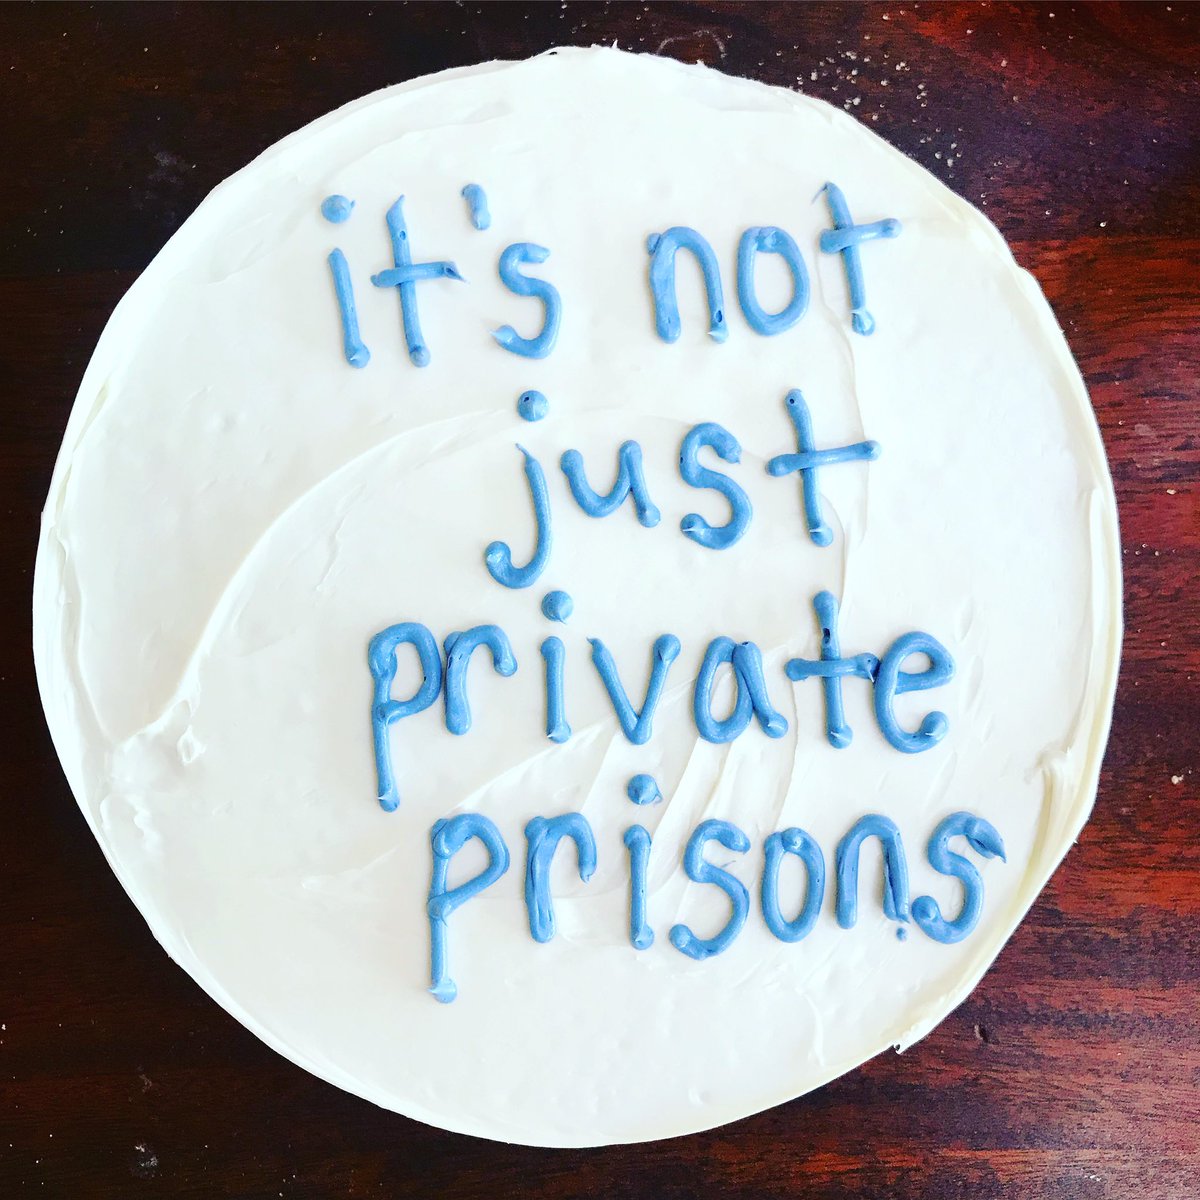 Yesterday Biden announced that the federal gov’t will no longer contract with private prisons. But let’s put this into context (thread)!